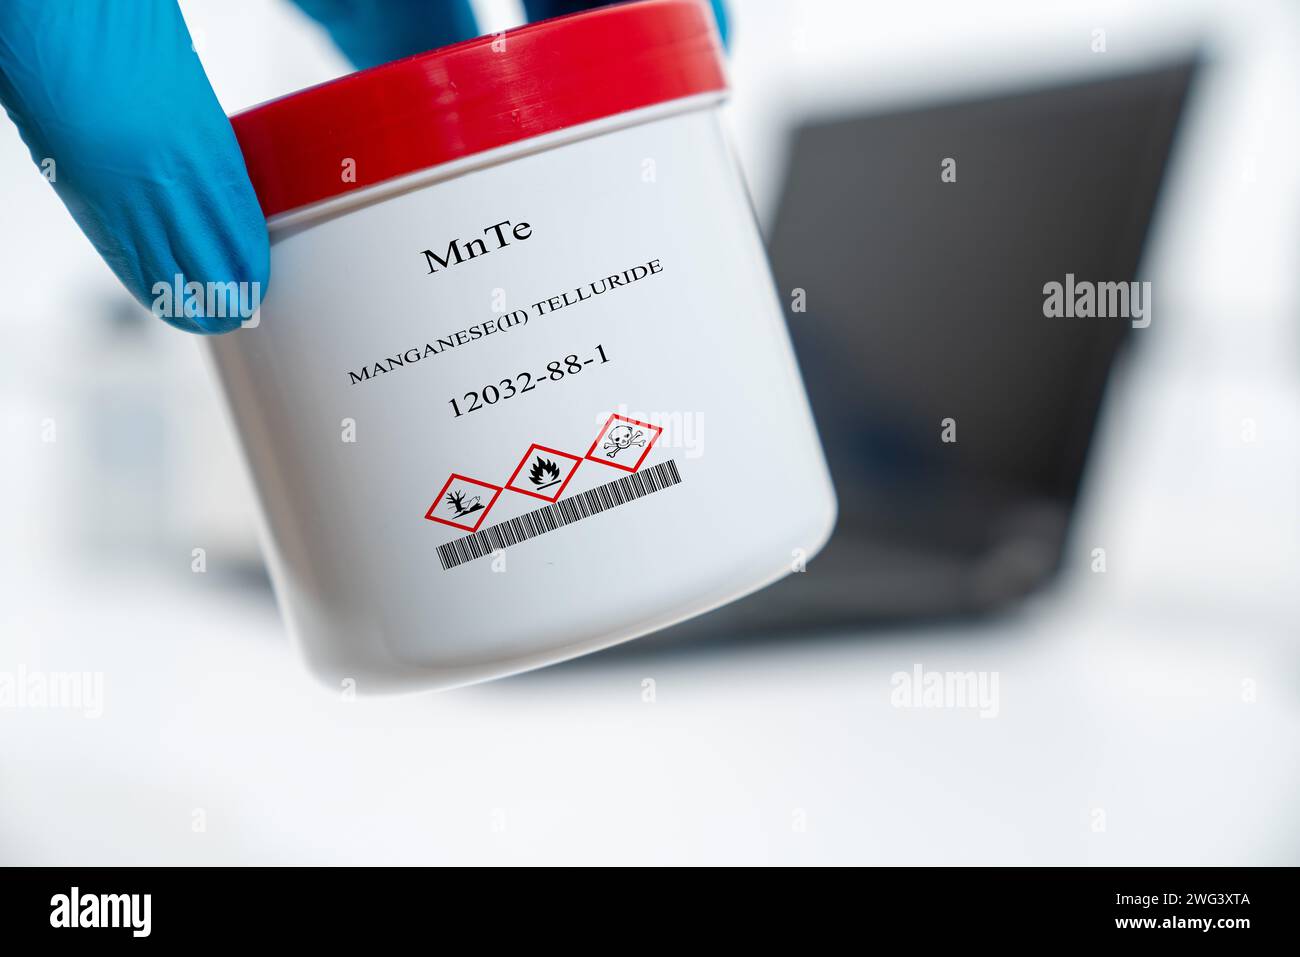 Container of manganese(II) telluride Stock Photo